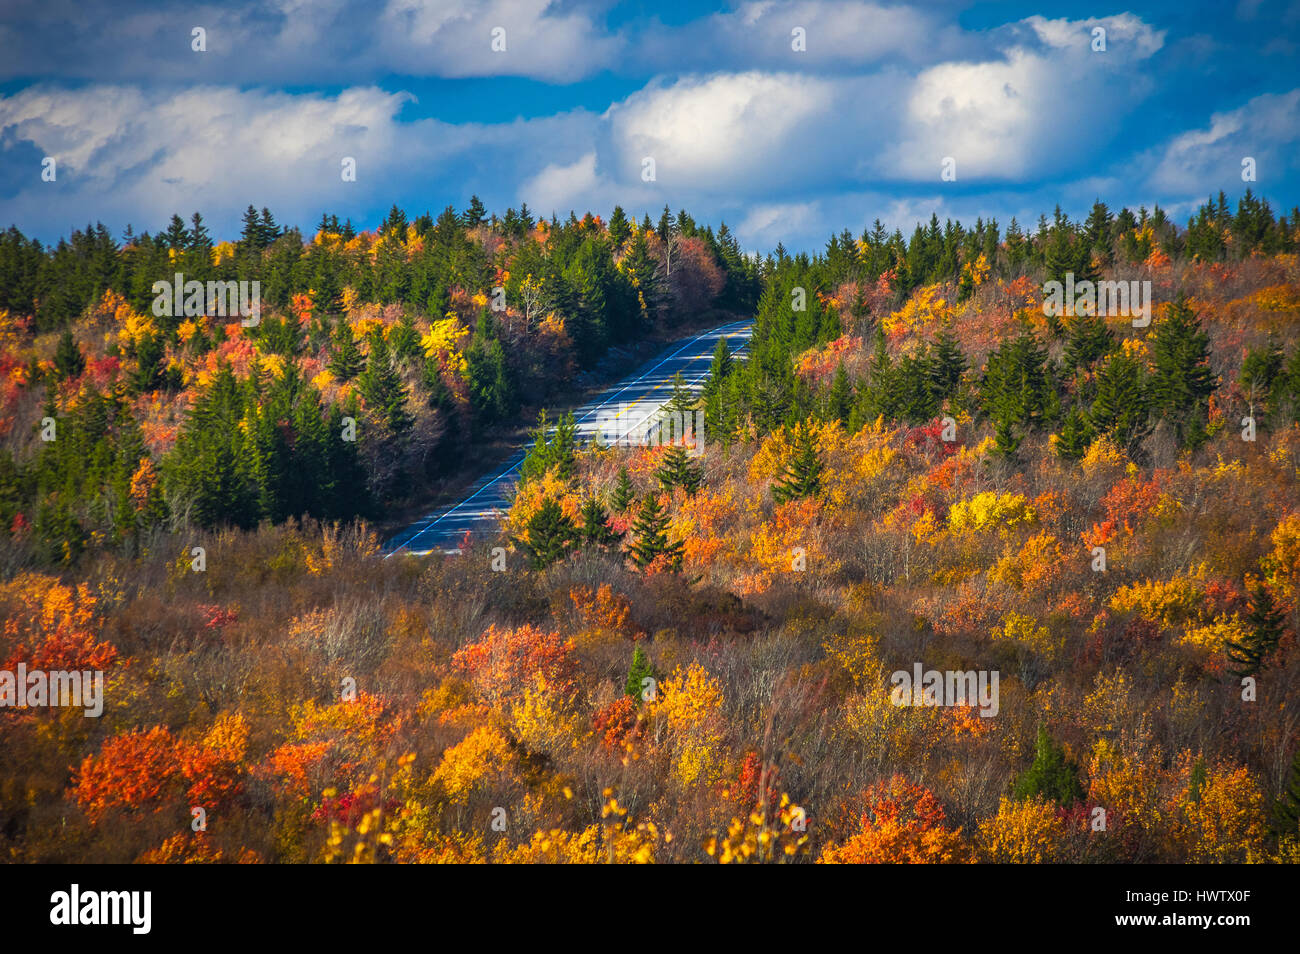 Colorful Fall foliage adorns the mountains as West Virginia's scenic Highway 150 cuts through the mountain ridges. Stock Photo